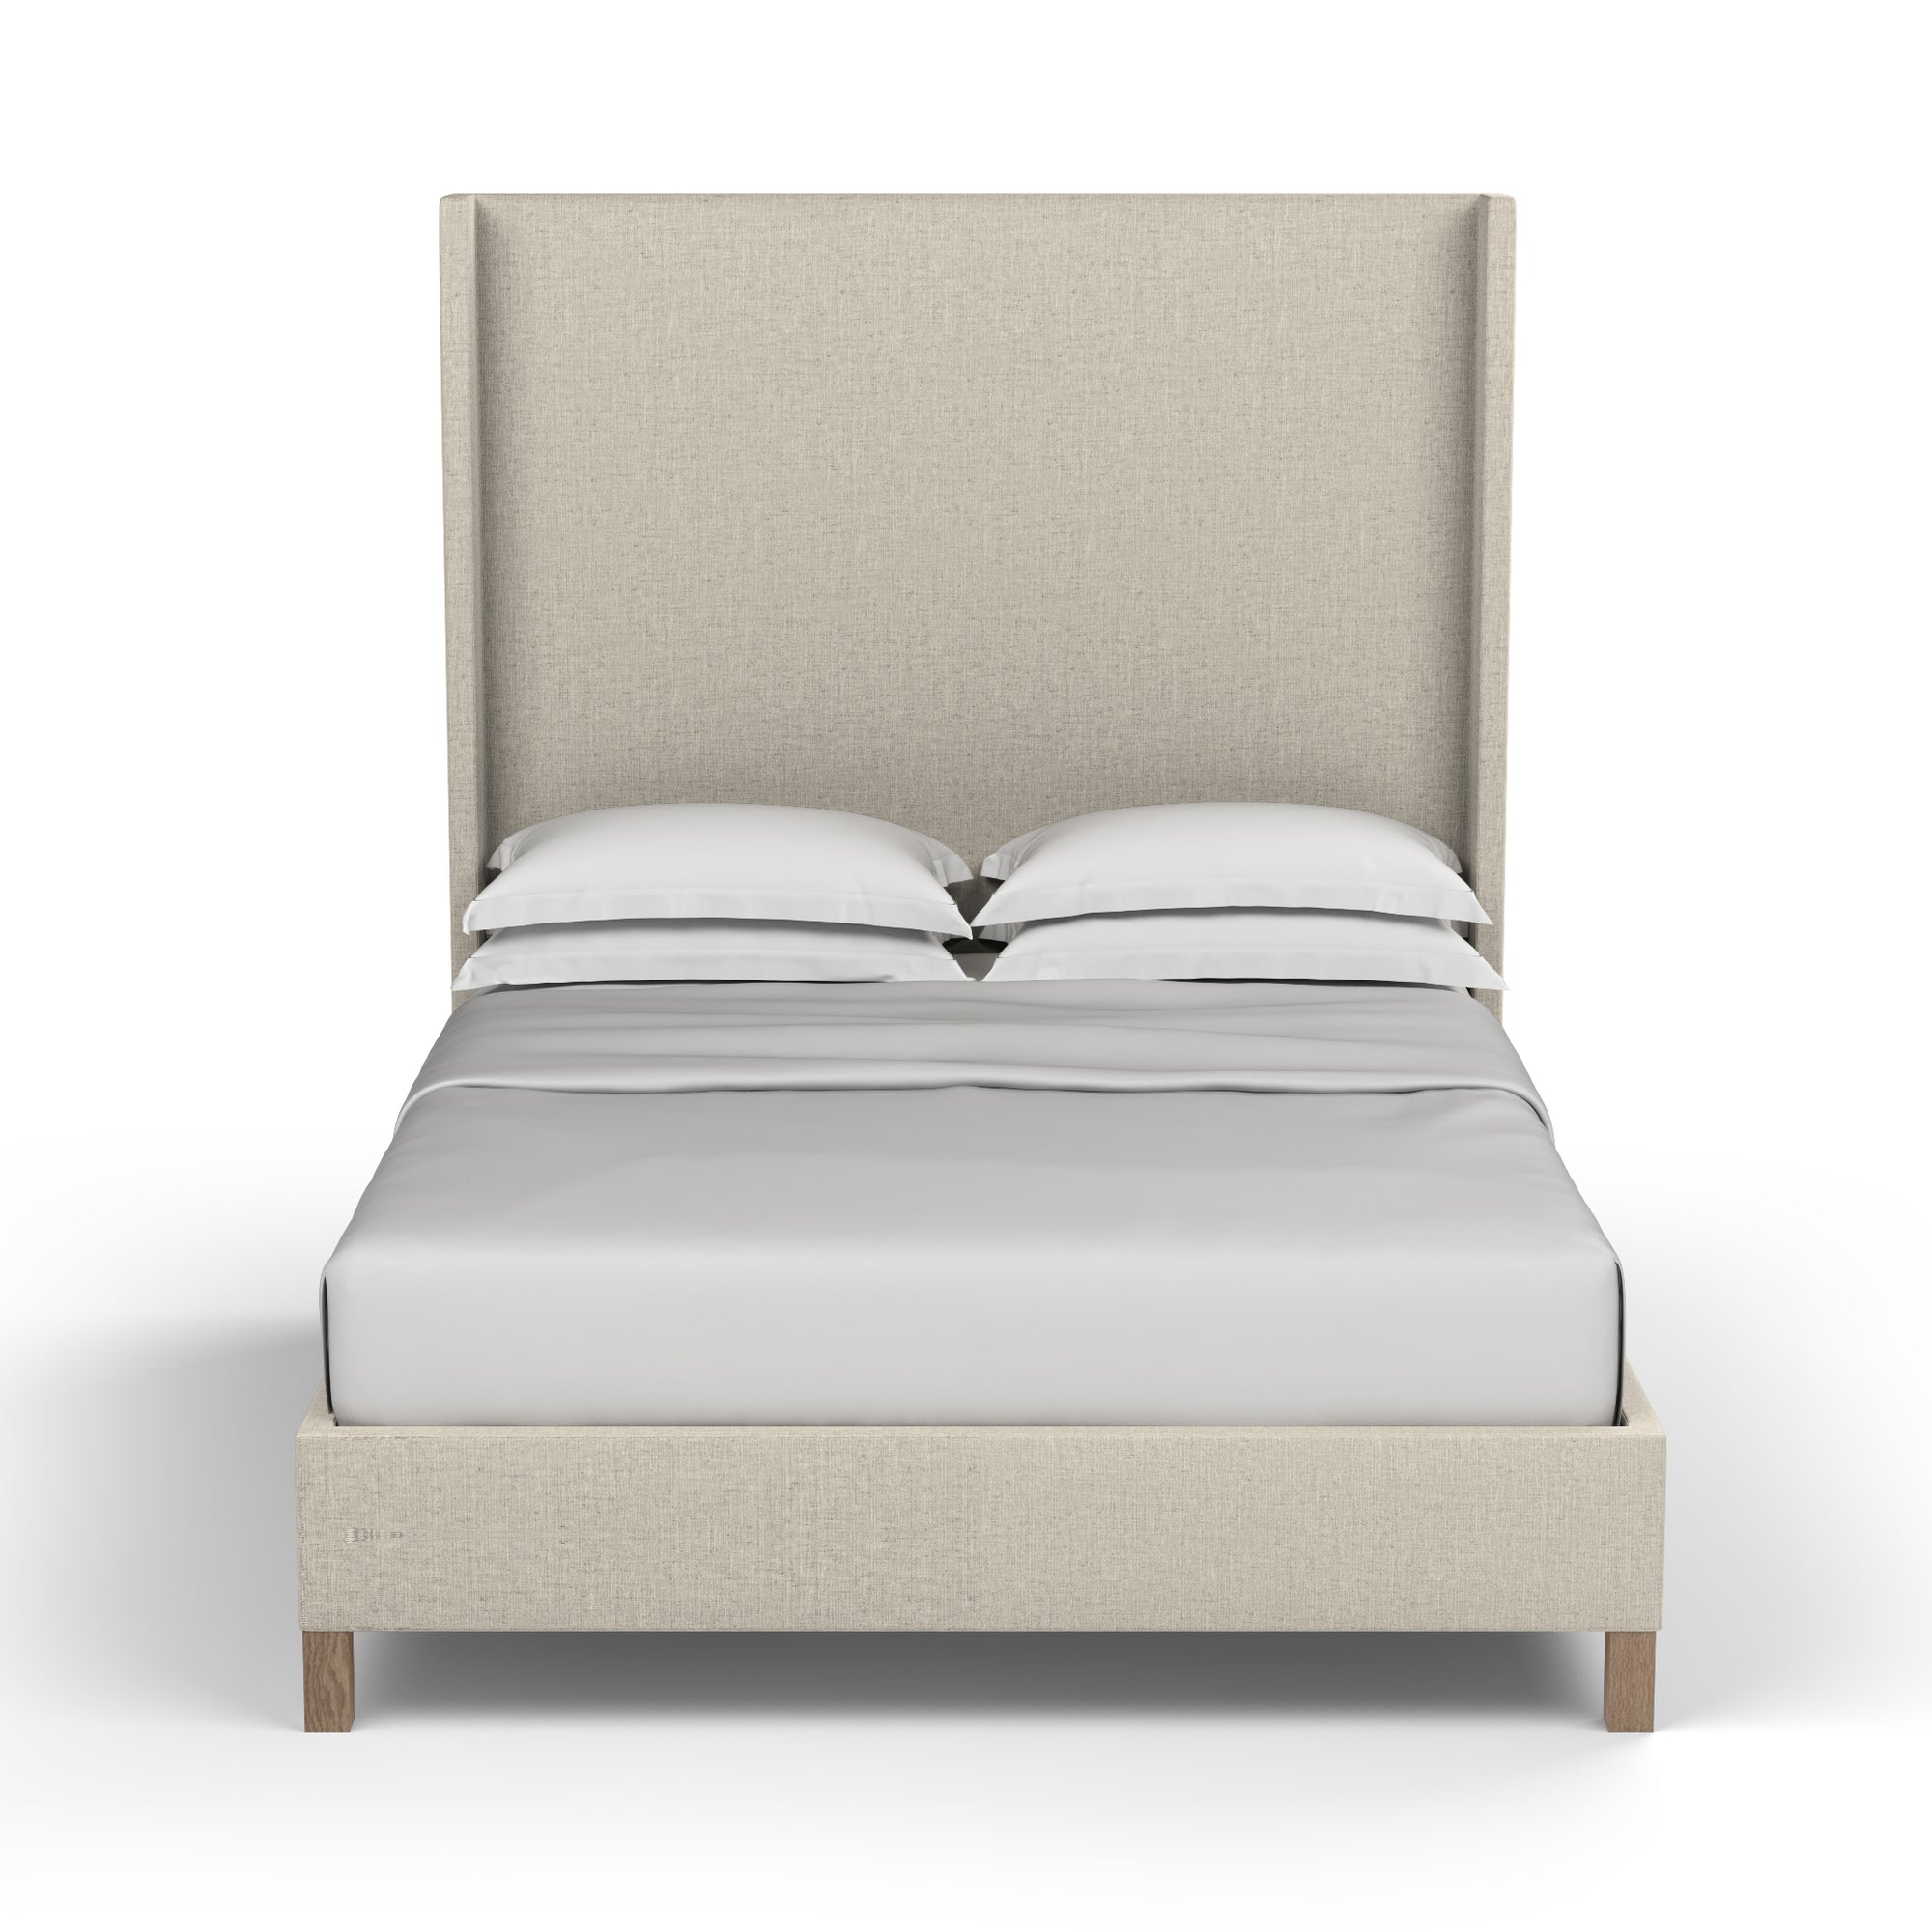 Lincoln Shelter Bed - Oyster Box Weave Linen